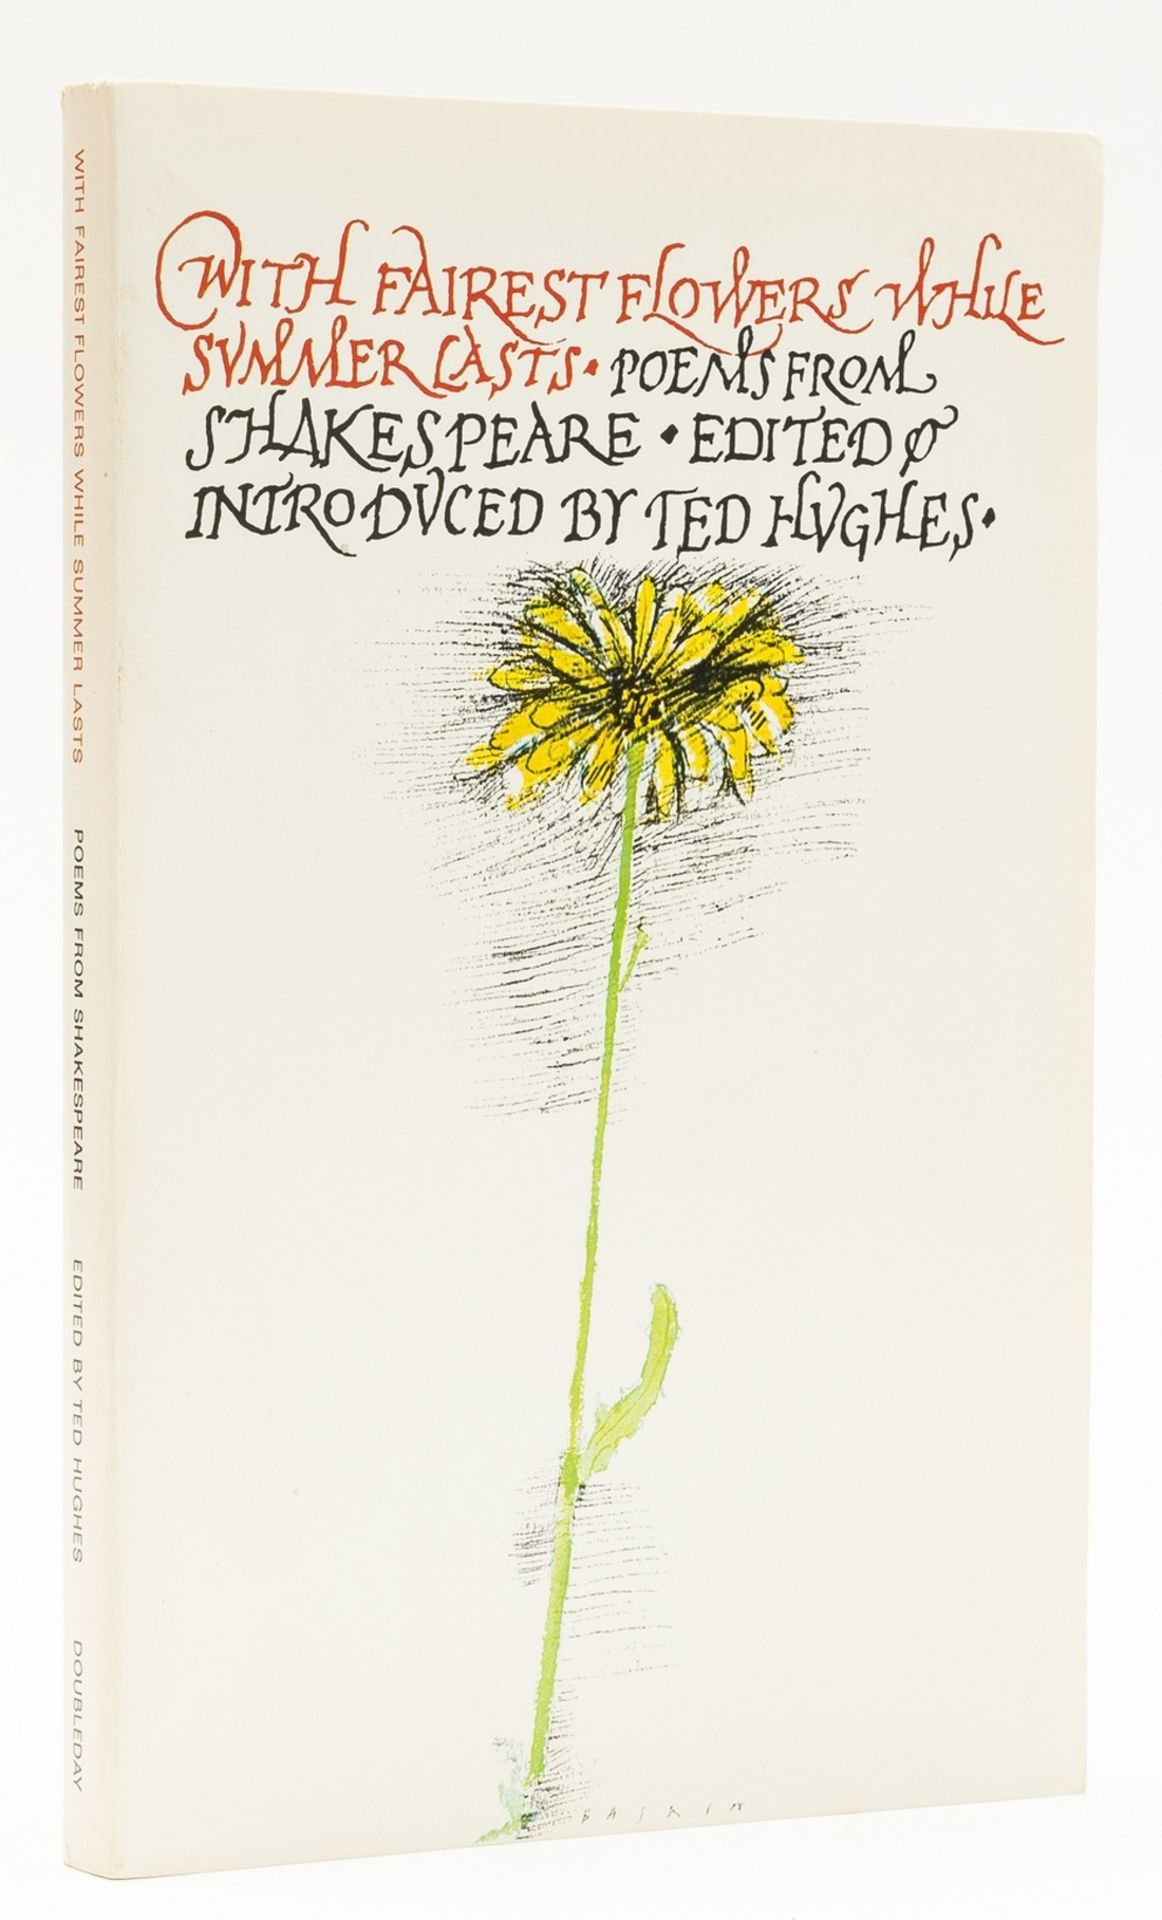 Hughes (Ted, editor) With Fairest Flowers Whilst Summer Lasts: Poems from Shakespeare, with scarce …